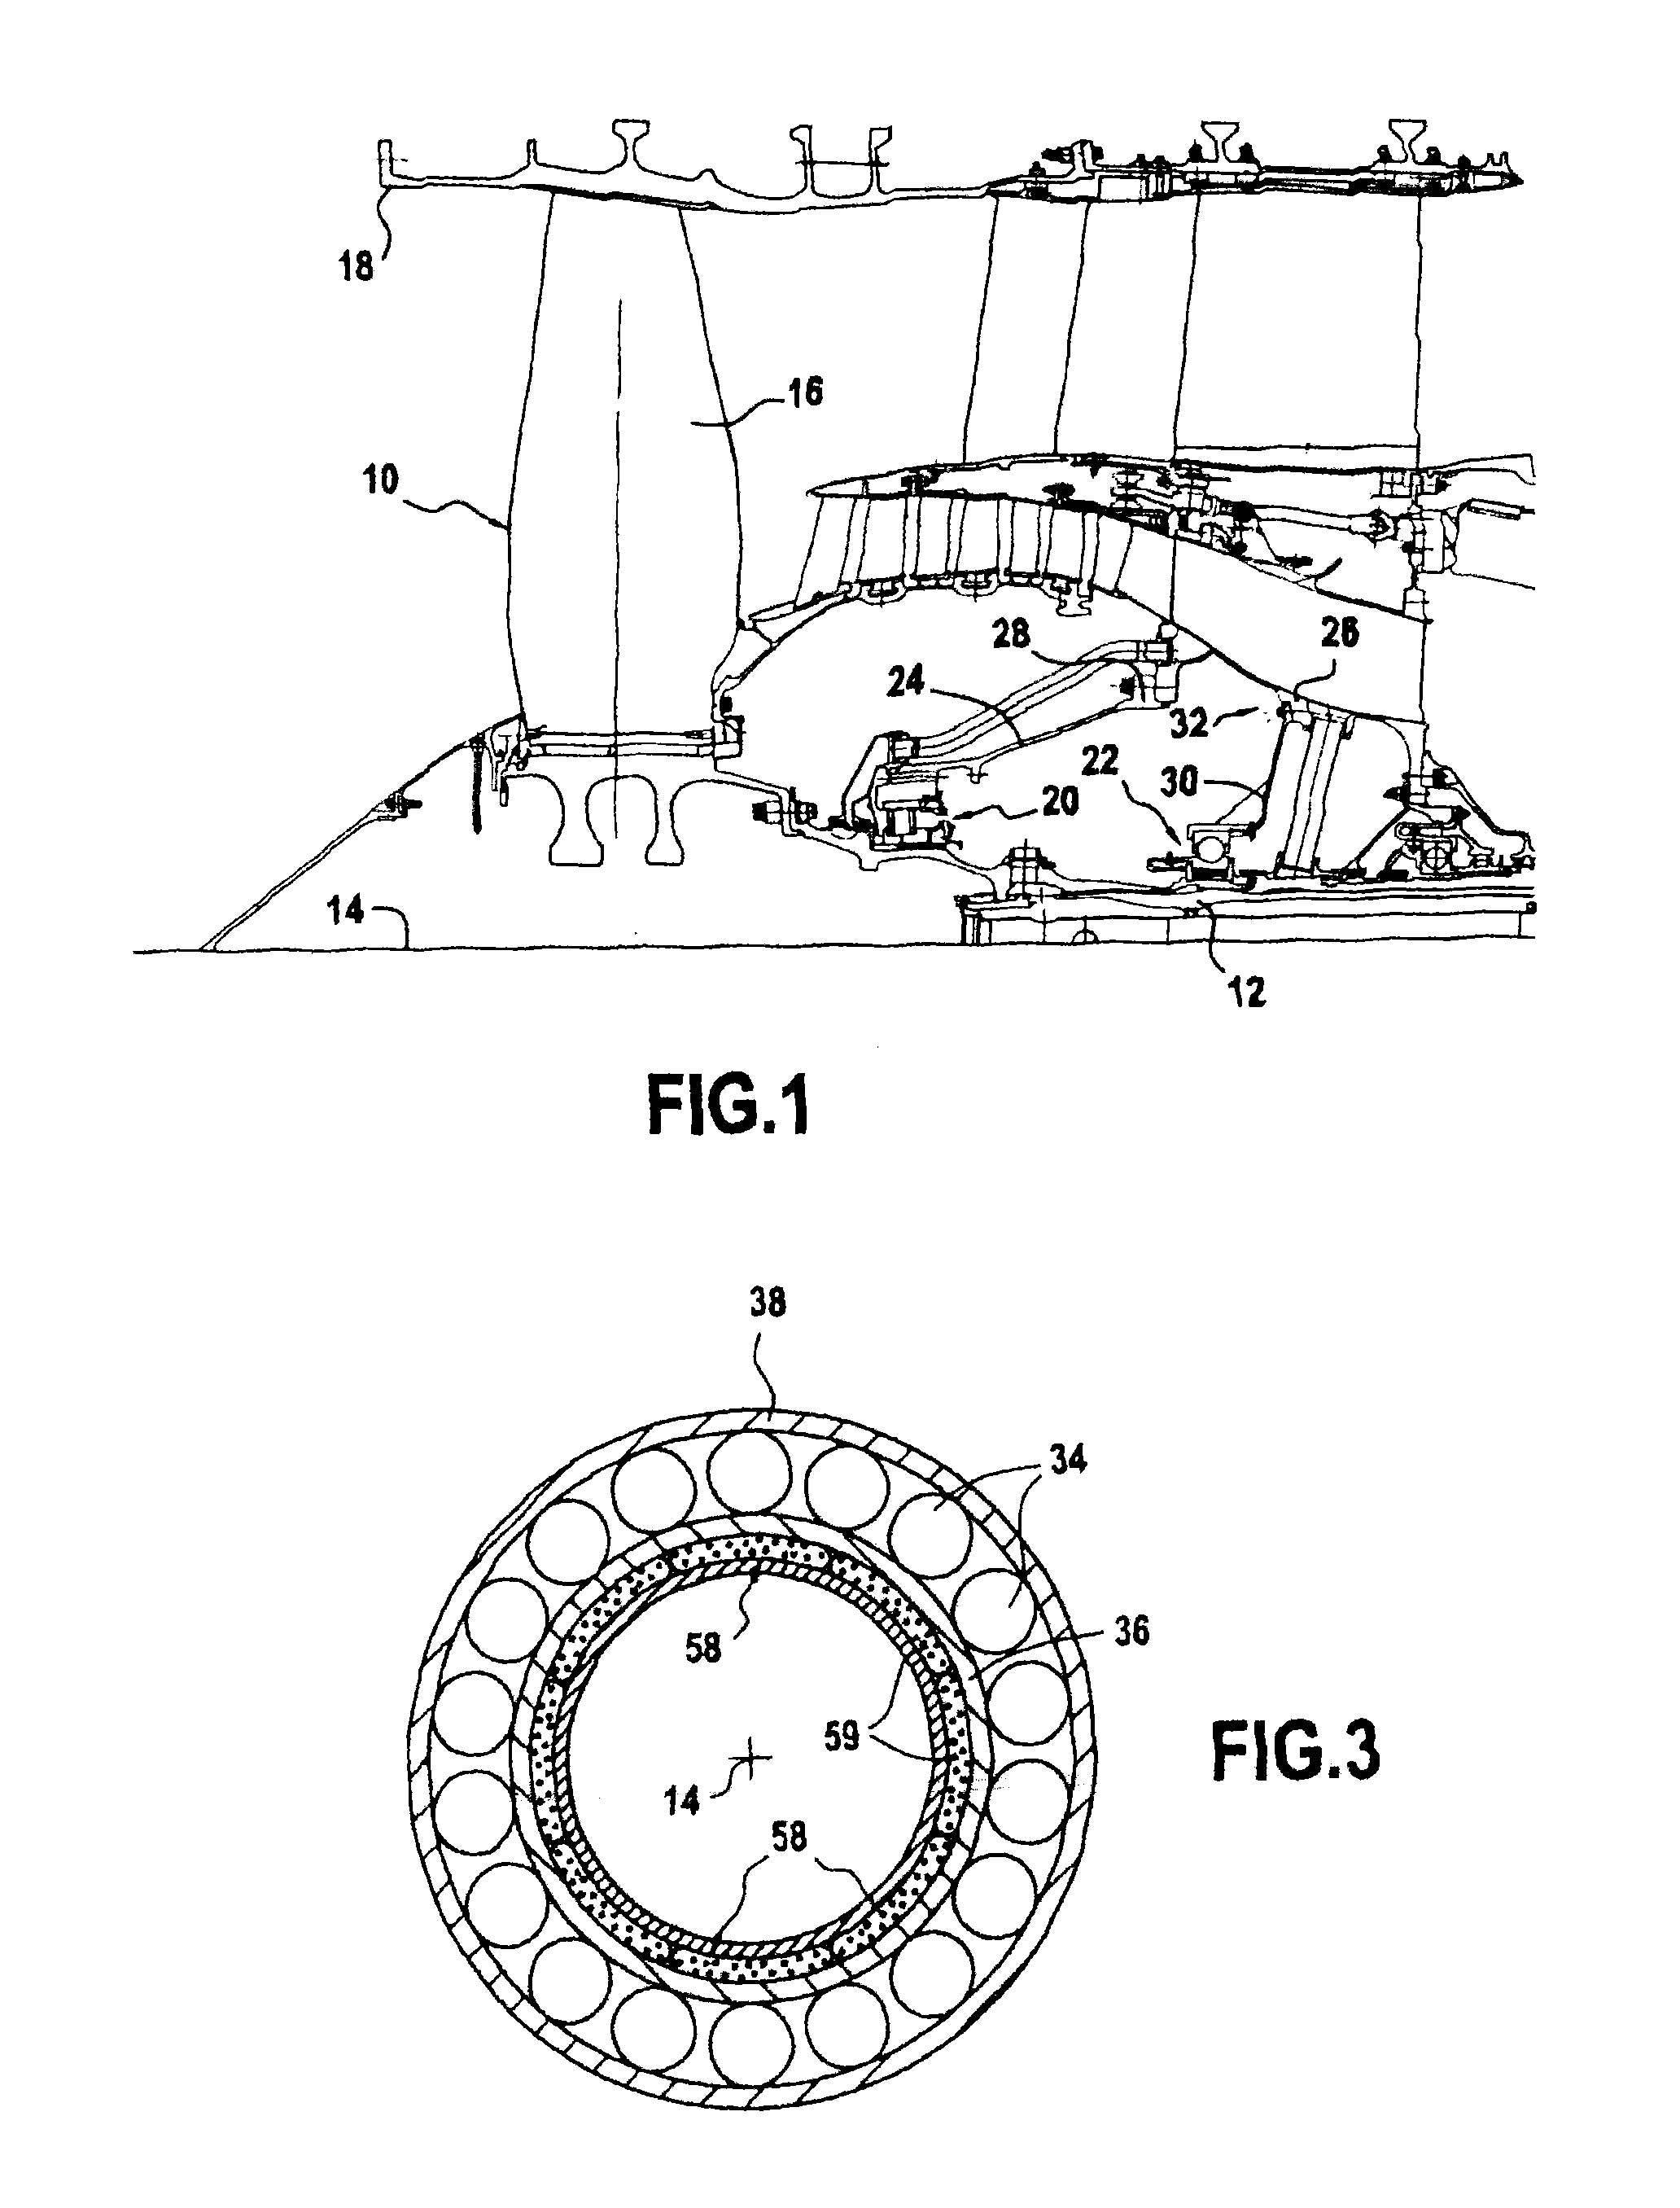 Uncoupling system for an aircraft turbojet engine rotary shaft